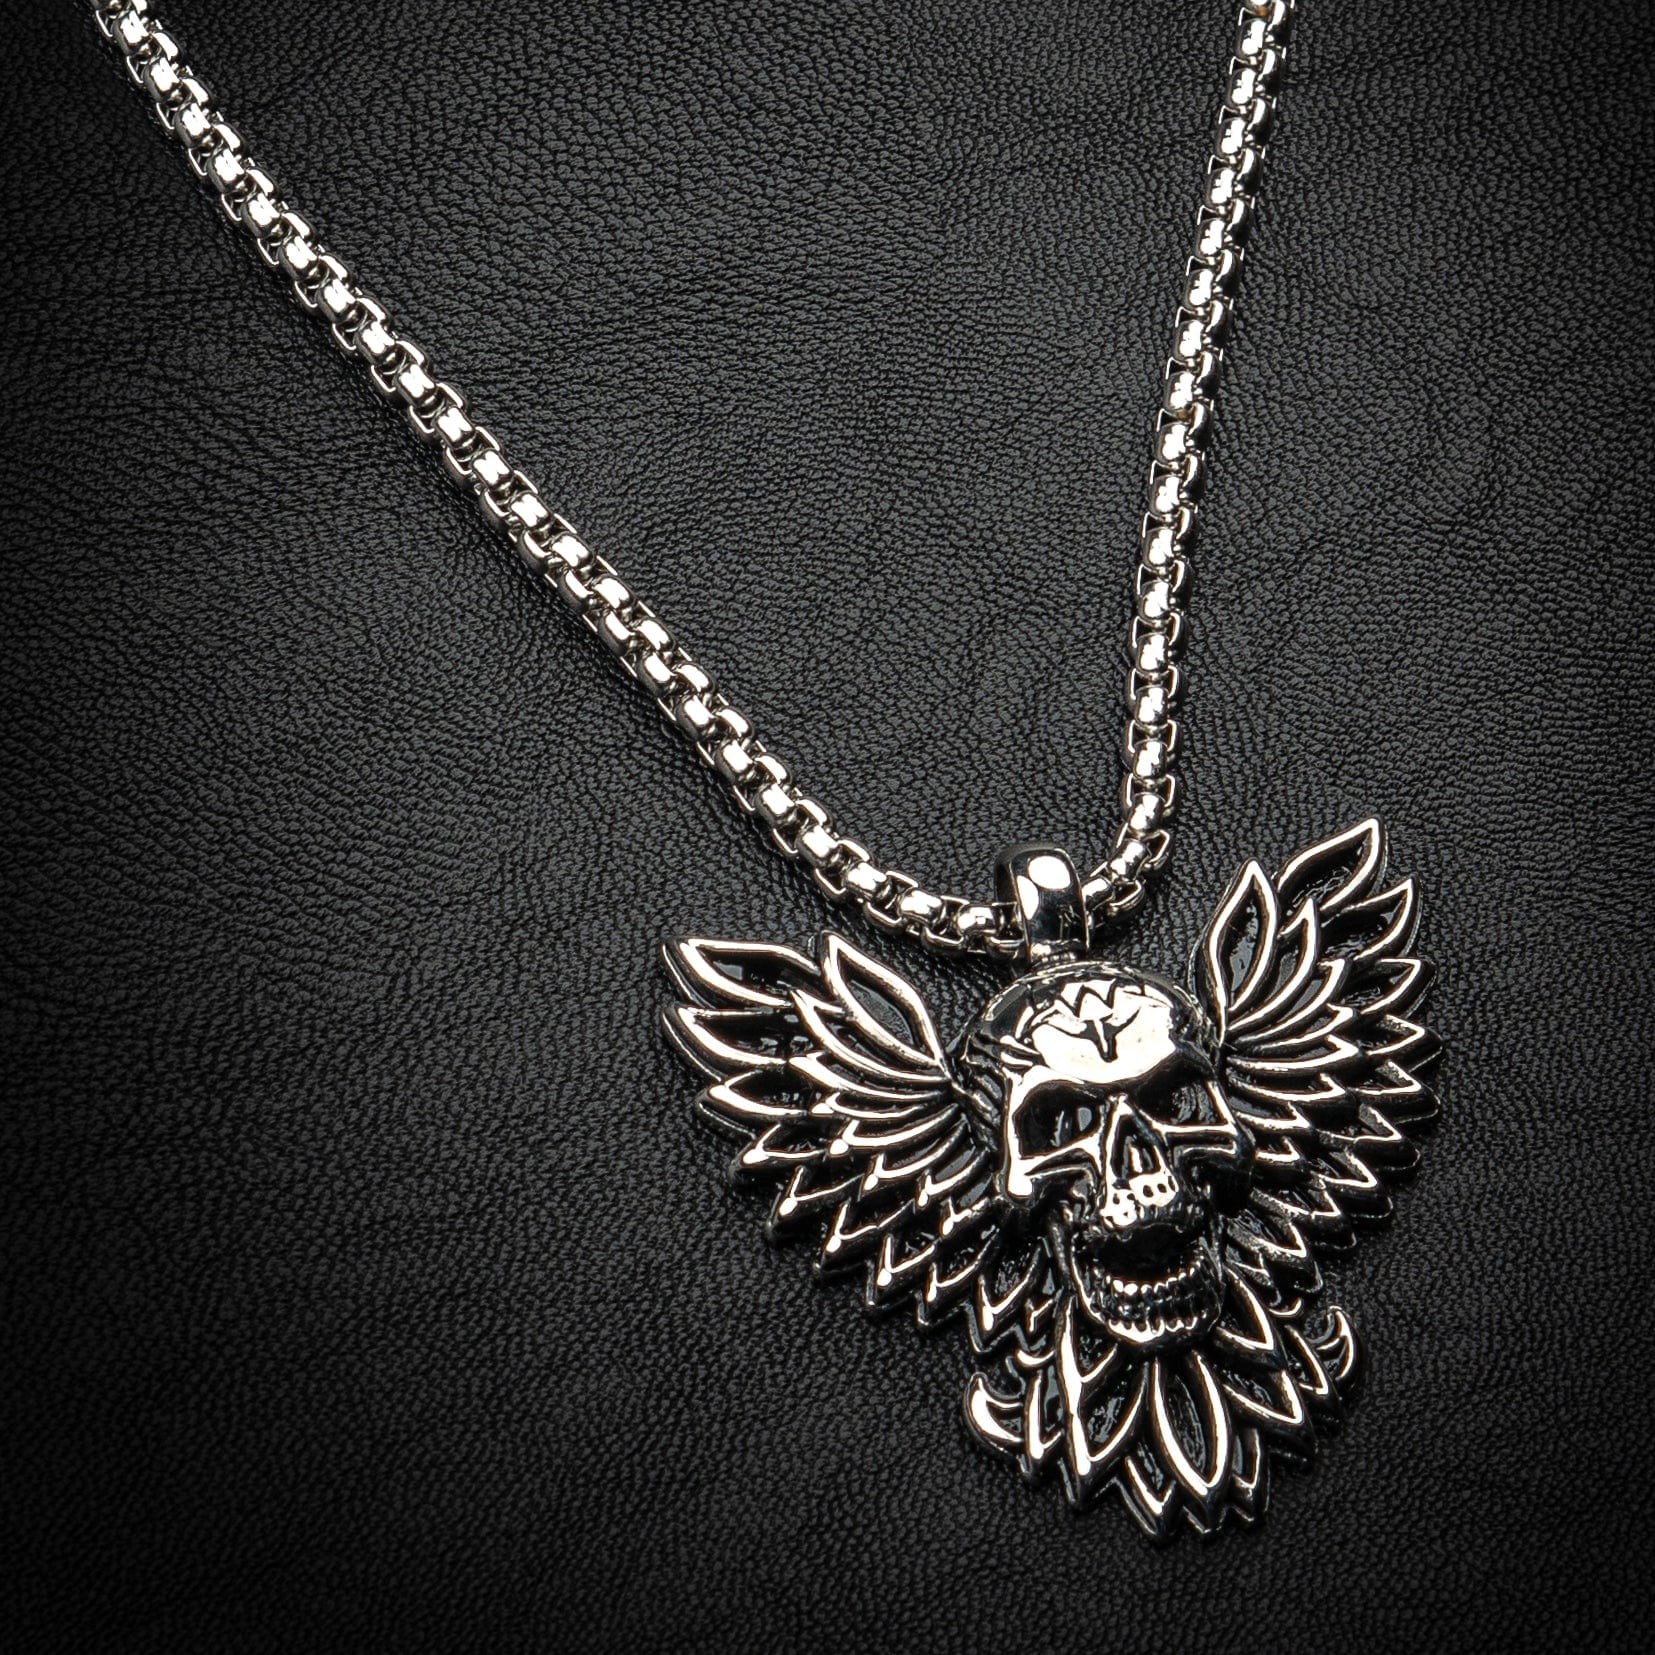 Wornstar Clothing Necklace Vengeance Chain Necklace